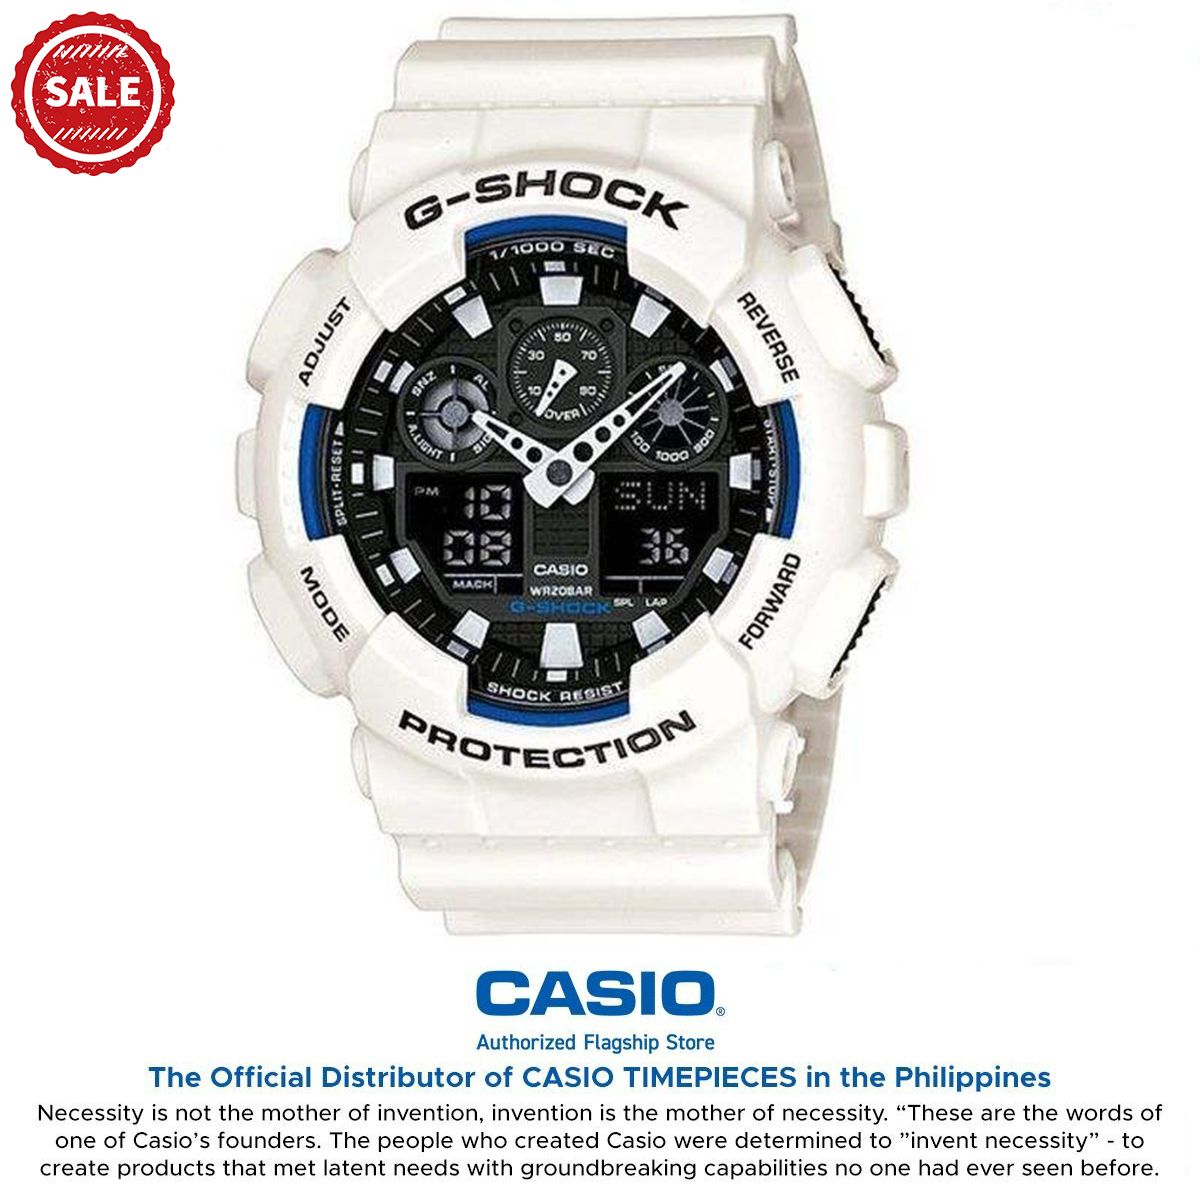 G Shock GA100 Men Sport Watch Dual Time Display 200M Water Resistant  Shockproof and Waterproof World Time LED Auto Light Sports Wrist Watches GA-100B-7A  Lazada PH